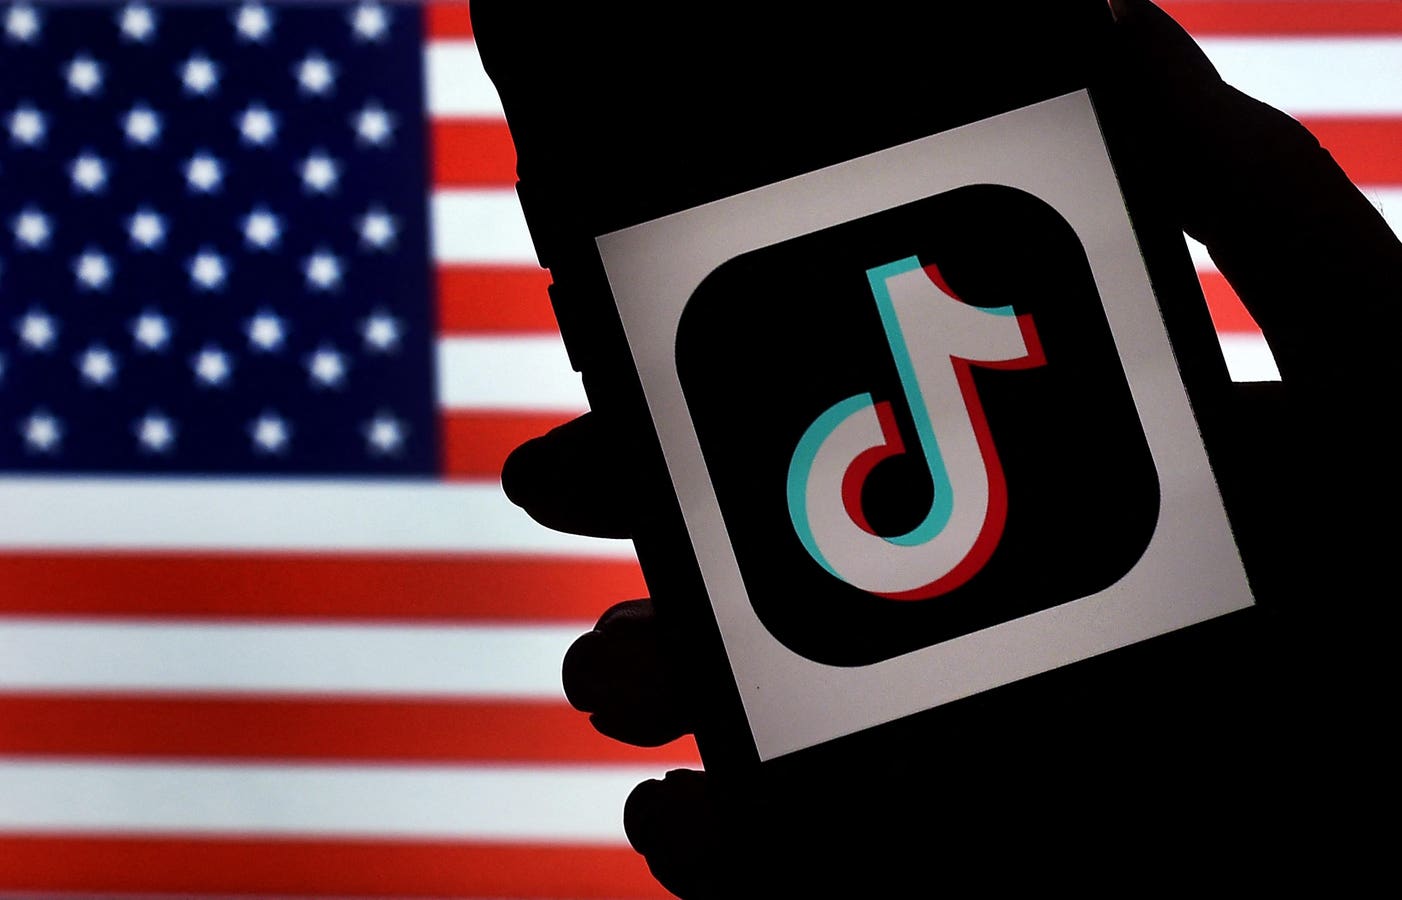 TikTok Targeted In New National Security Bill On Adversary Owned Apps